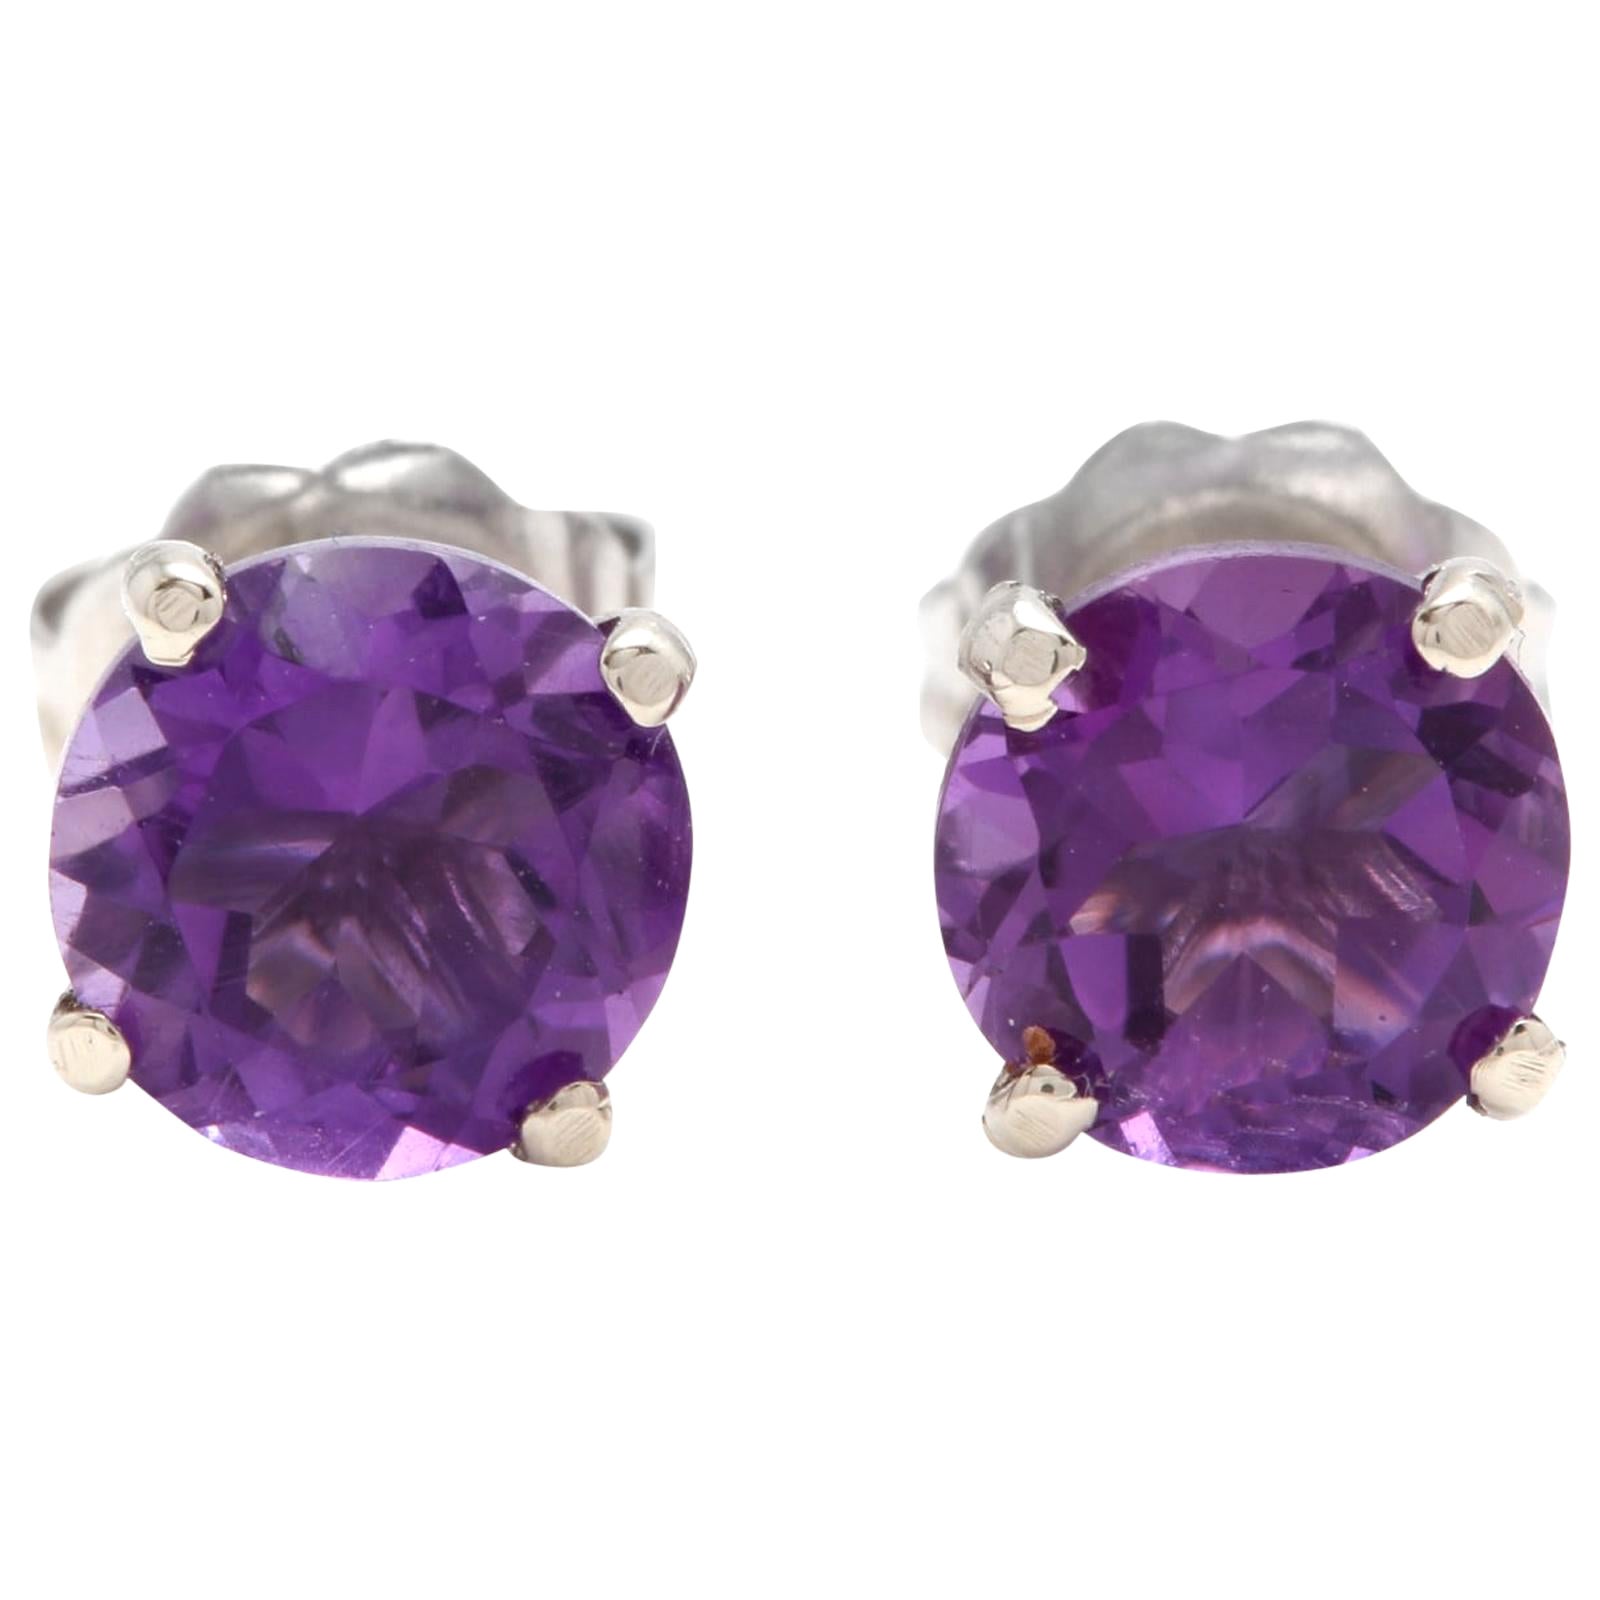 Exquisite 1.80 Carat Natural Amethyst 14K Solid White Gold Martini Stud Earring